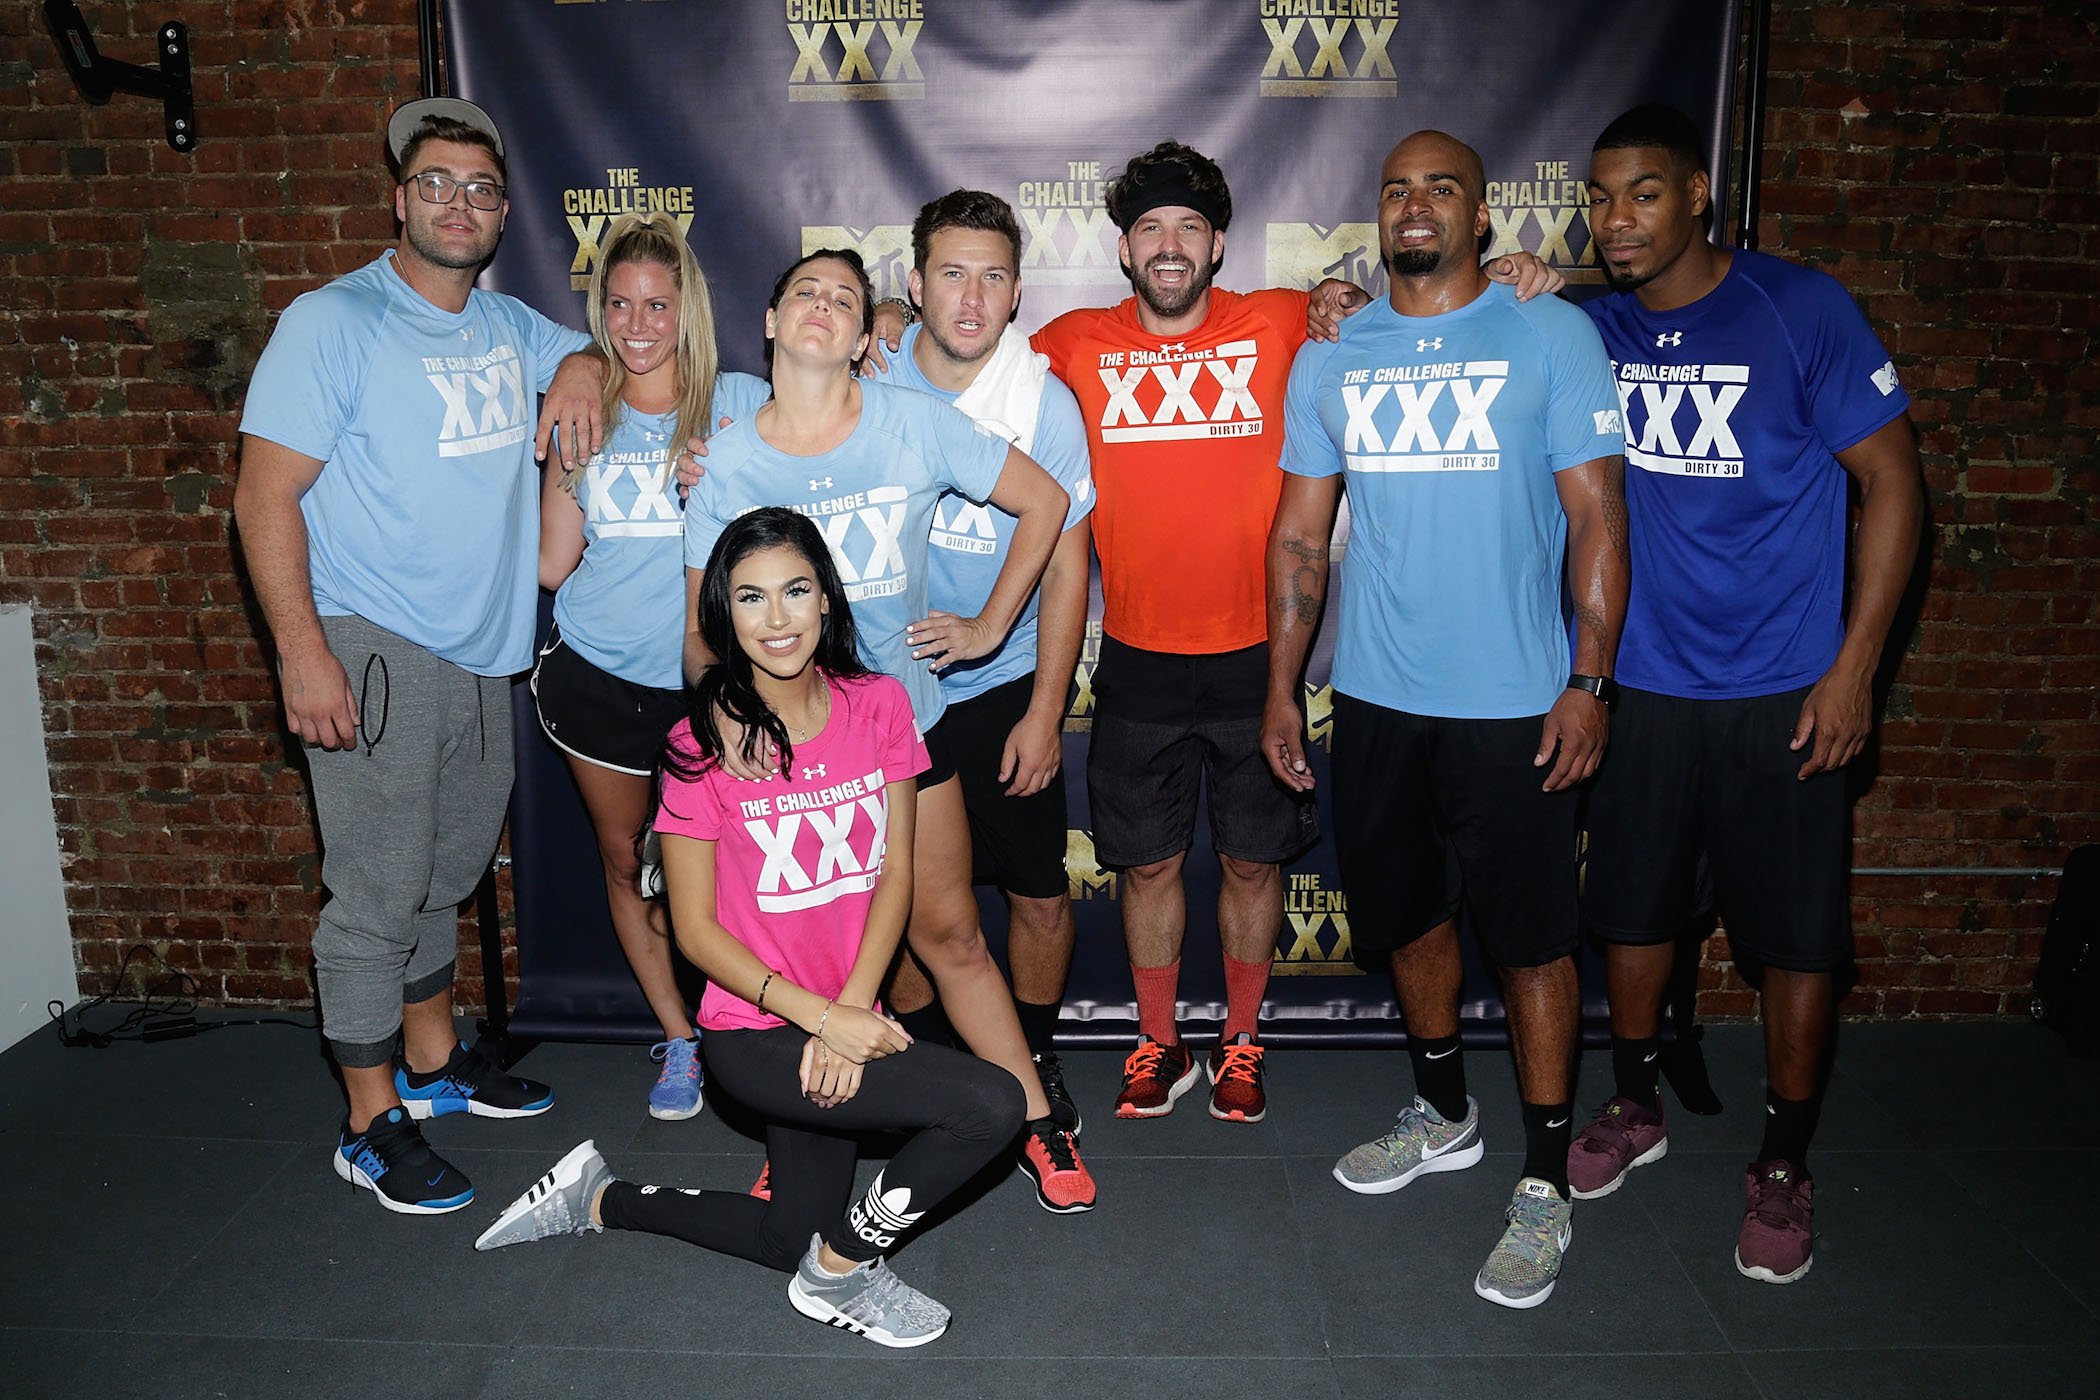 A group of competitors from MTV's 'The Challenge' posing for the camera at 'The Challenge XXX: Ultimate Fan Experience'